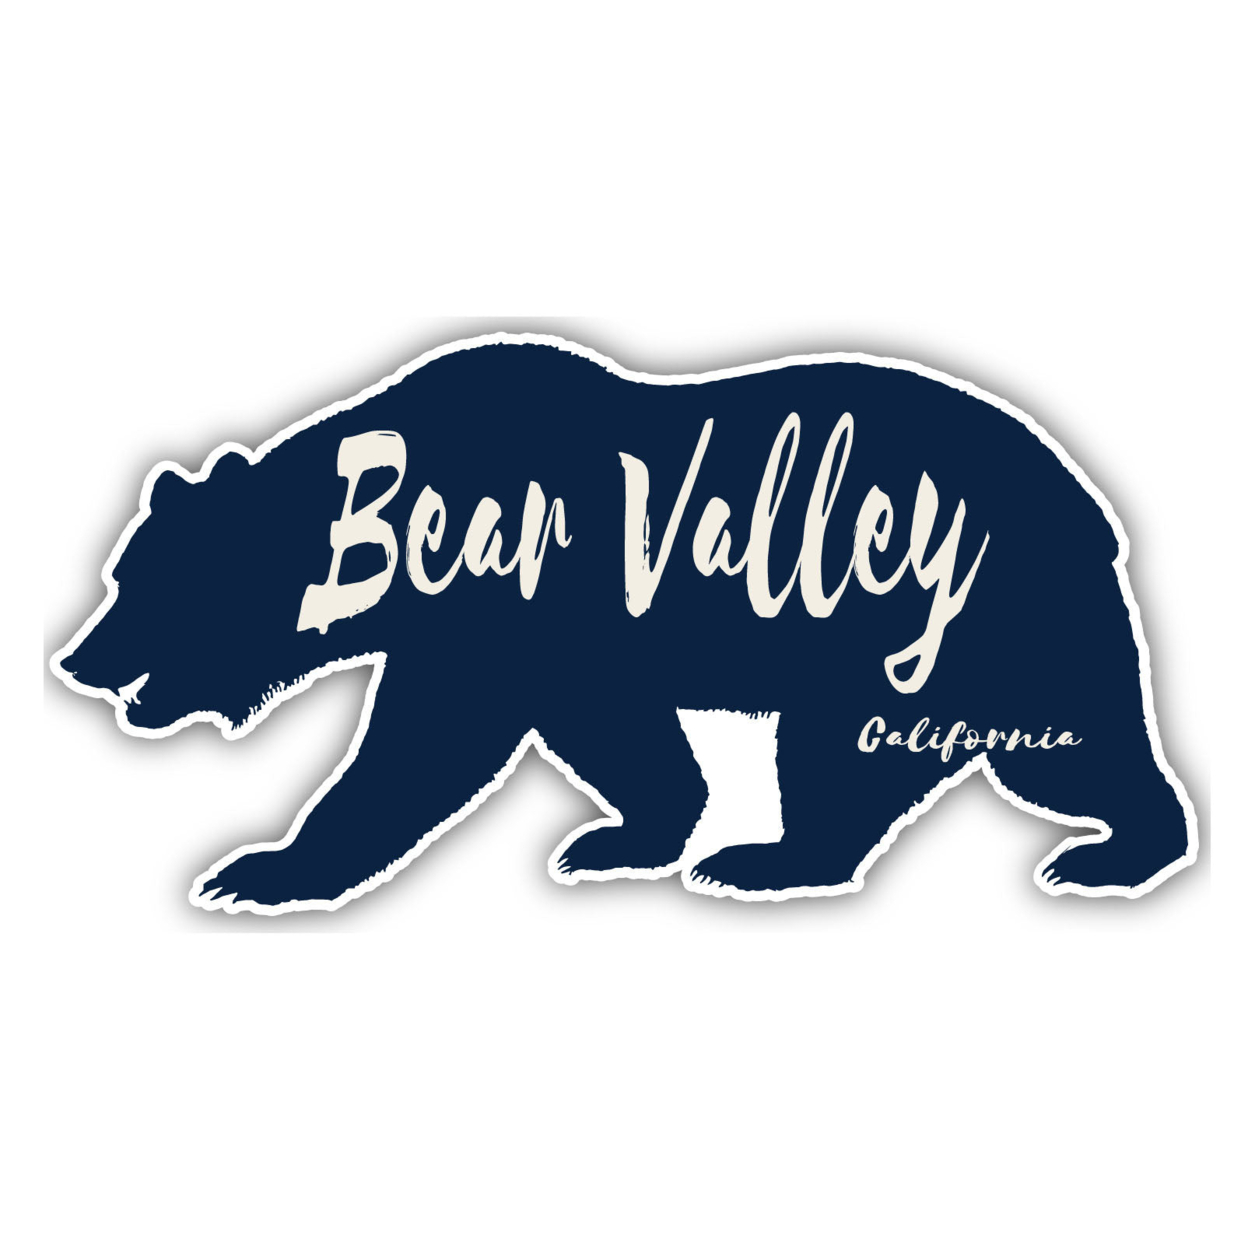 Bear Valley California Souvenir Decorative Stickers (Choose Theme And Size) - Single Unit, 8-Inch, Great Outdoors